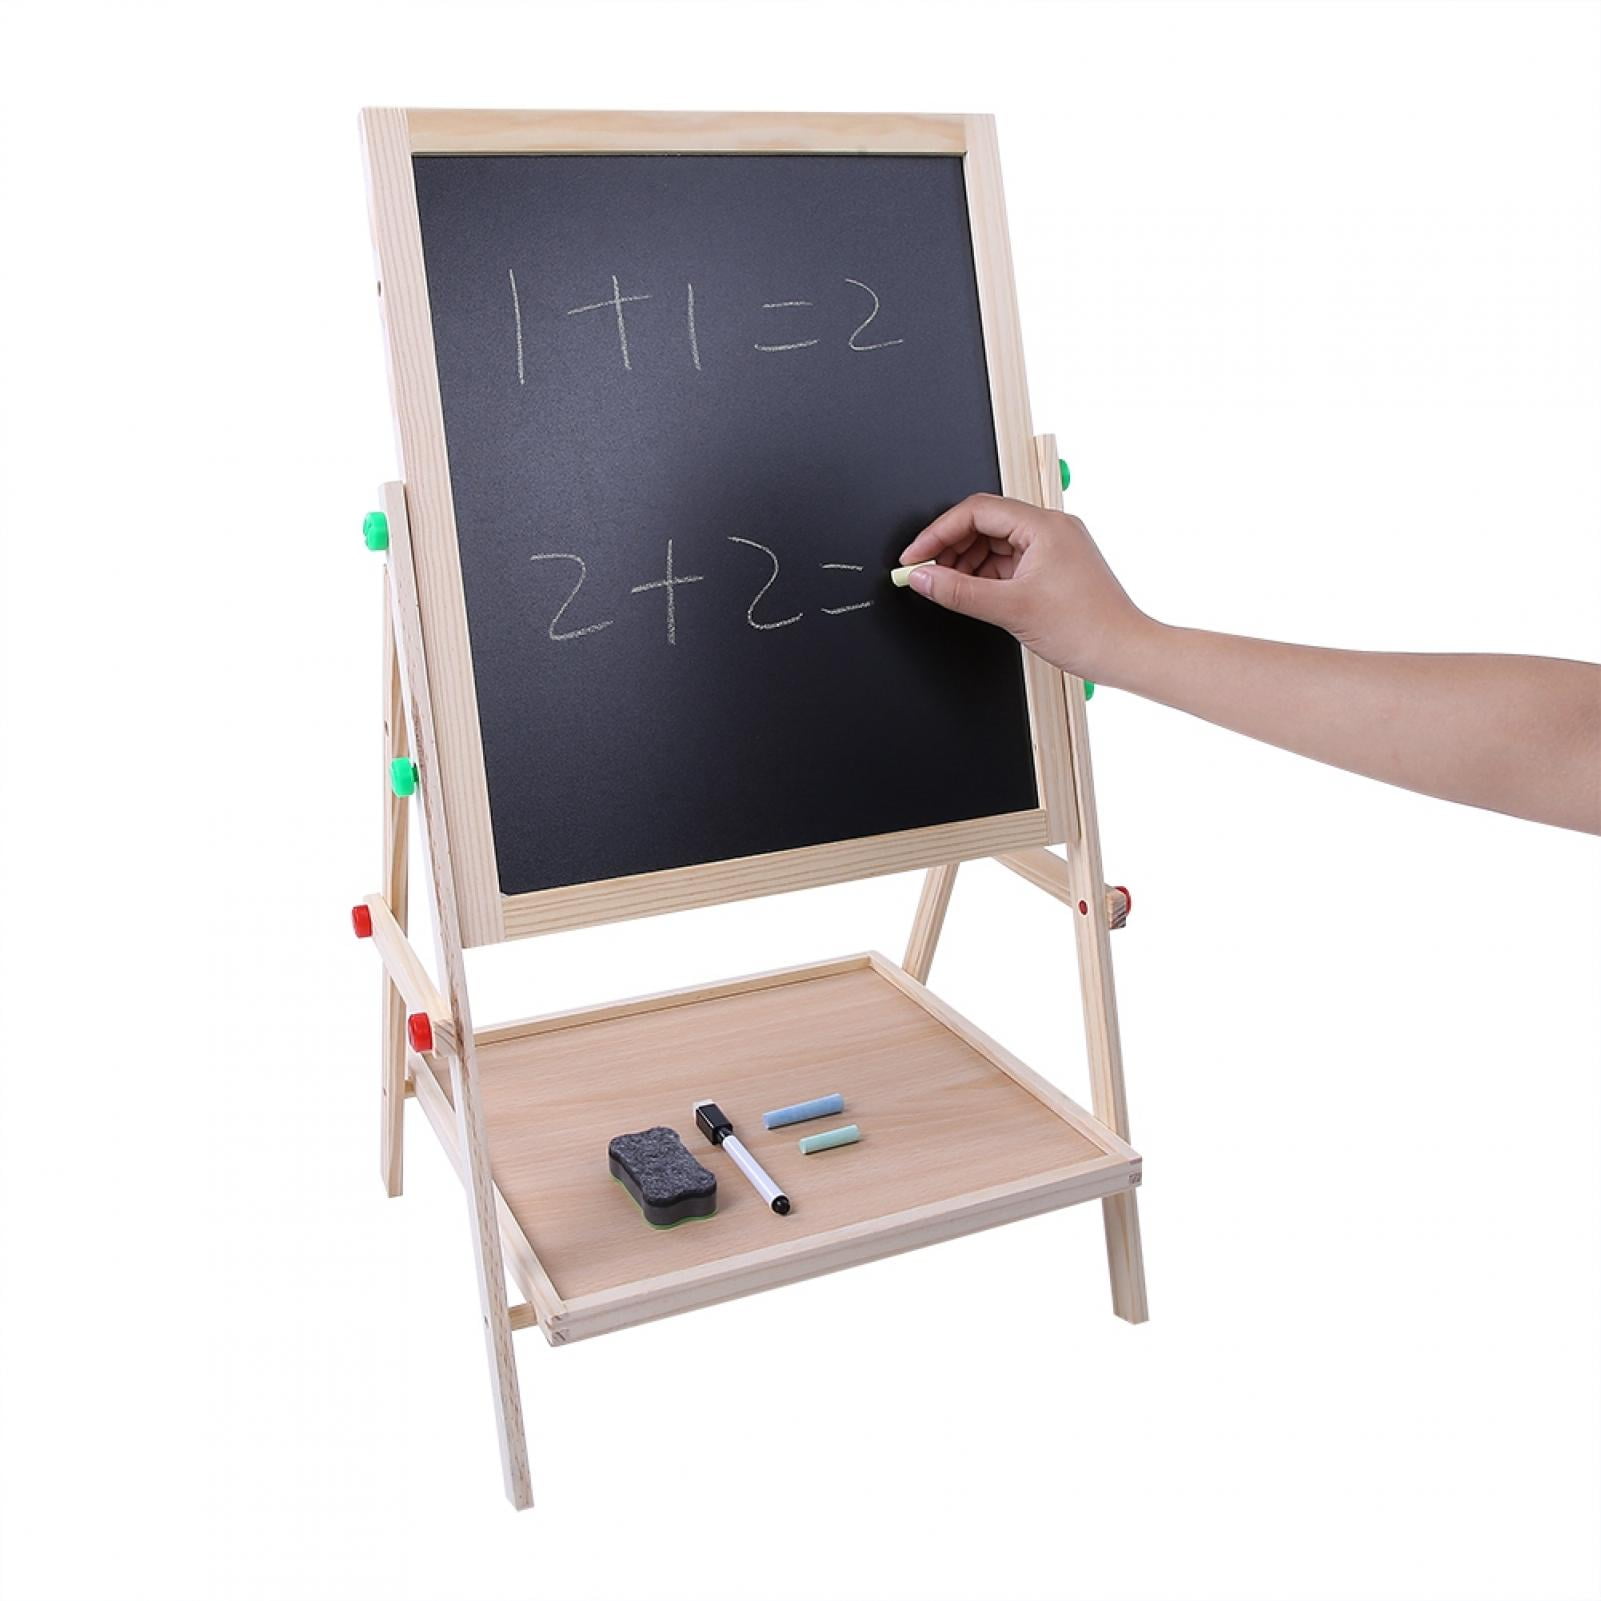  Mojitodon Art Easel For Kids, Adjustable Standing Rotatable  Double Sided Easel